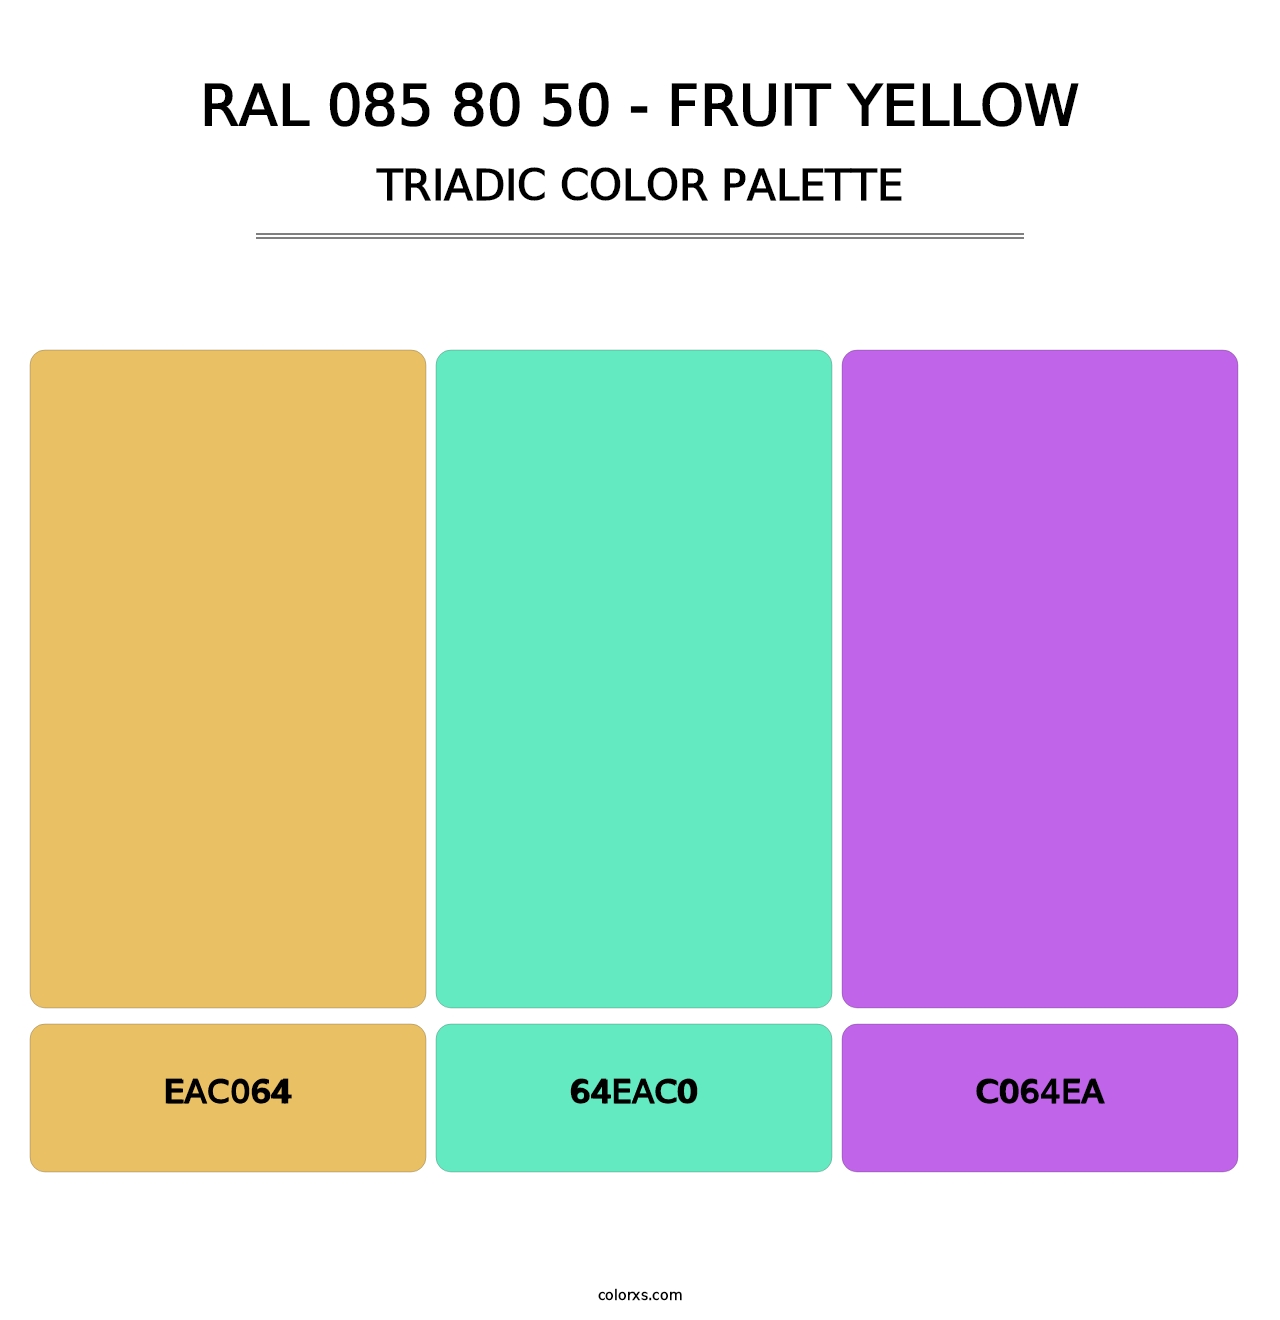 RAL 085 80 50 - Fruit Yellow - Triadic Color Palette